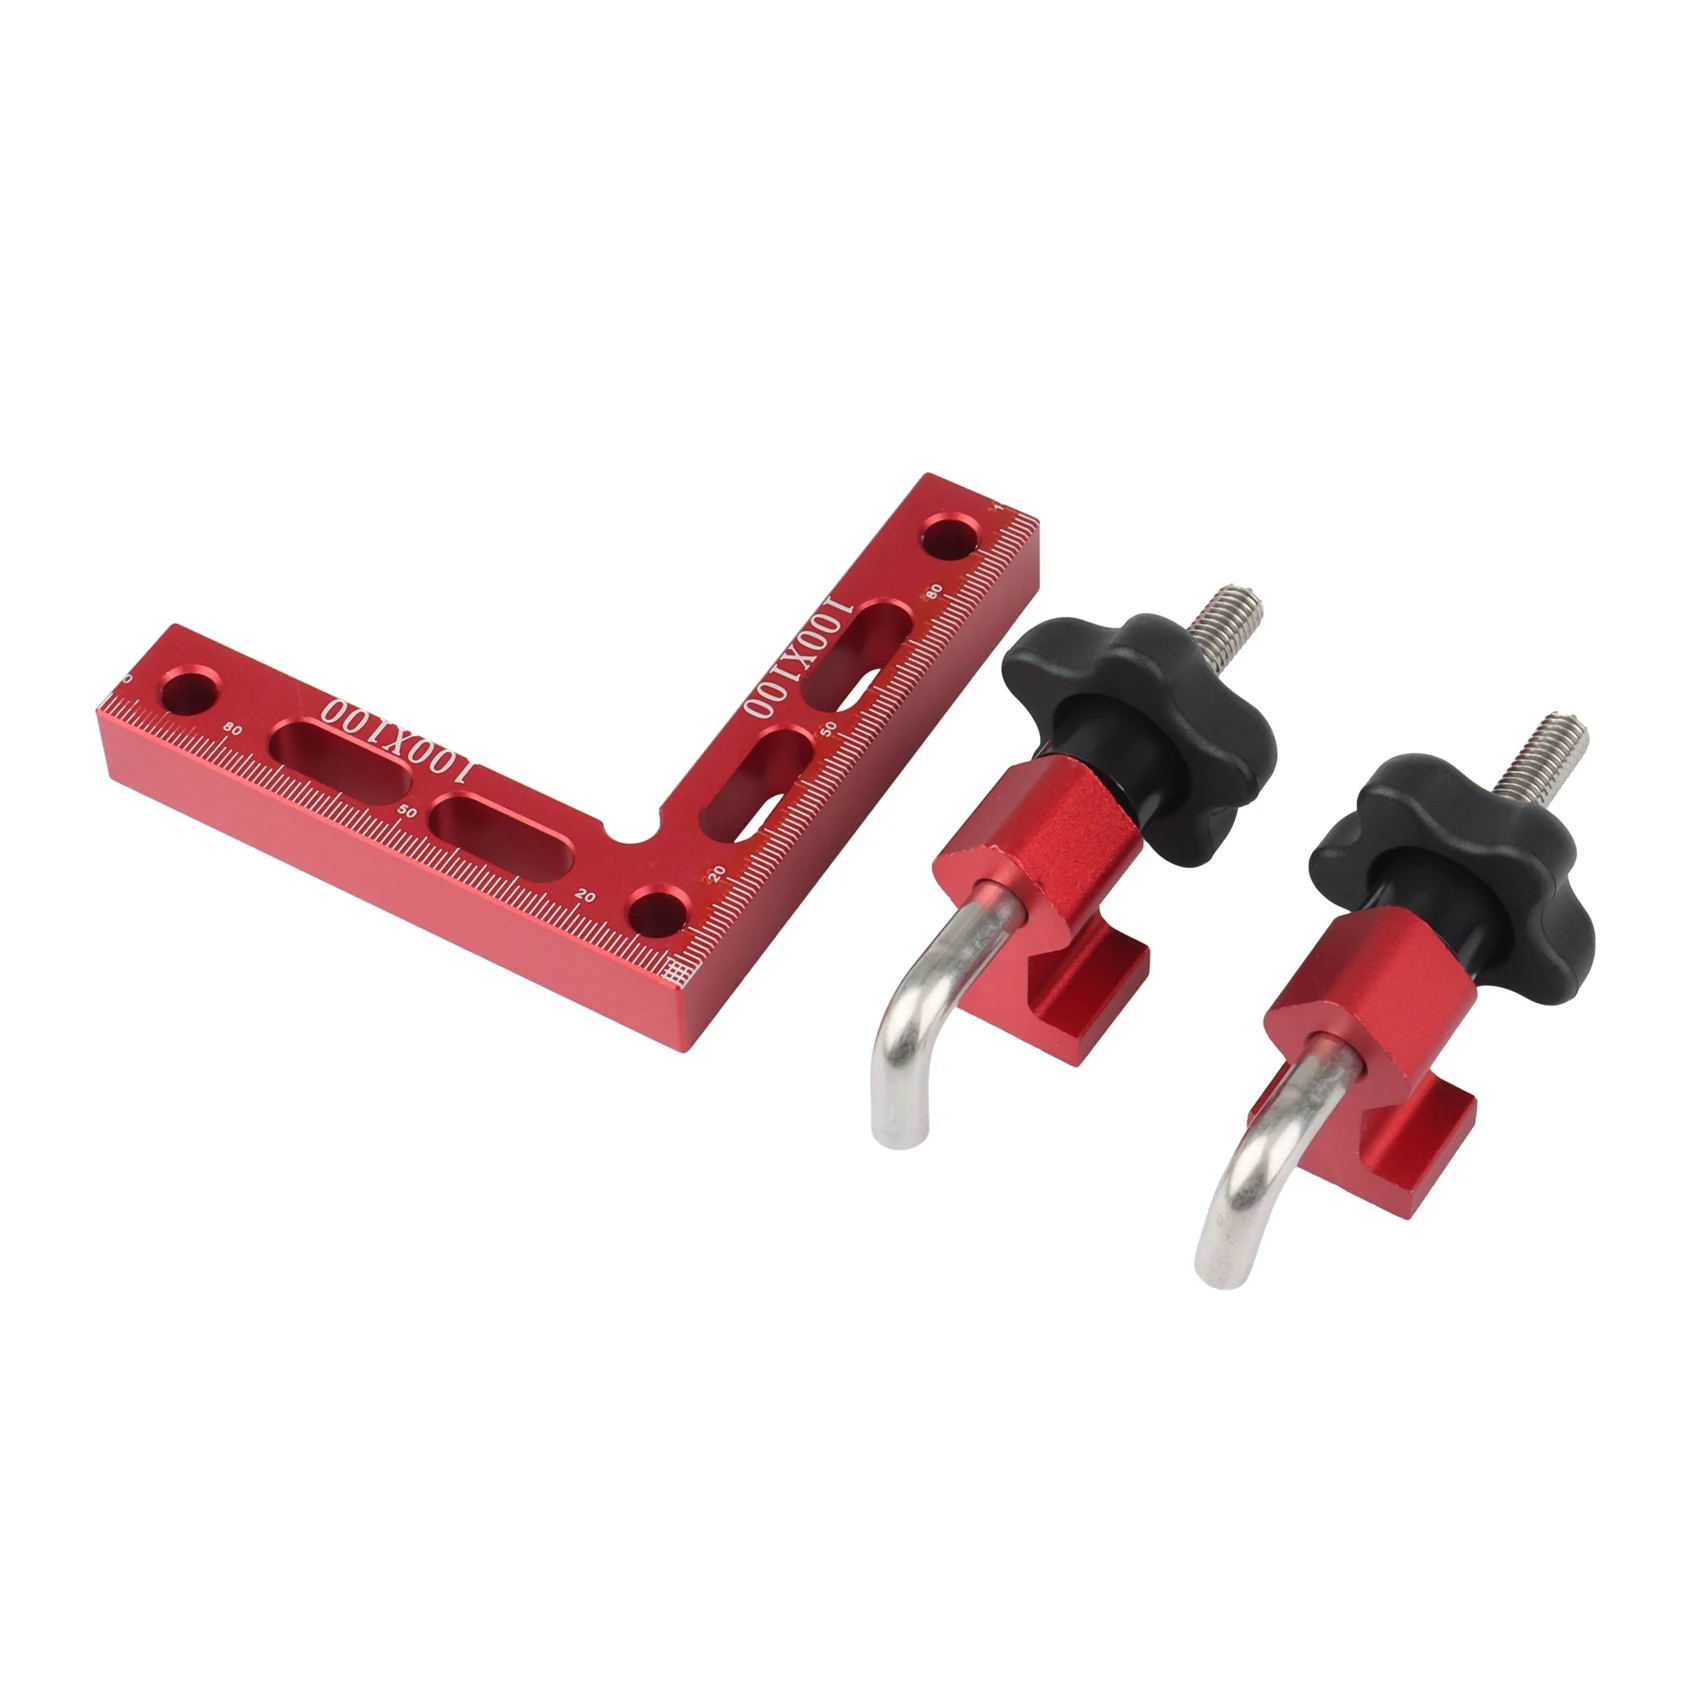 

Retail Right Angle Clamps 90 Degrees L-Shaped Auxiliary Fixture Splicing Board Positioning L-Shaped Ruler Positioner Clip